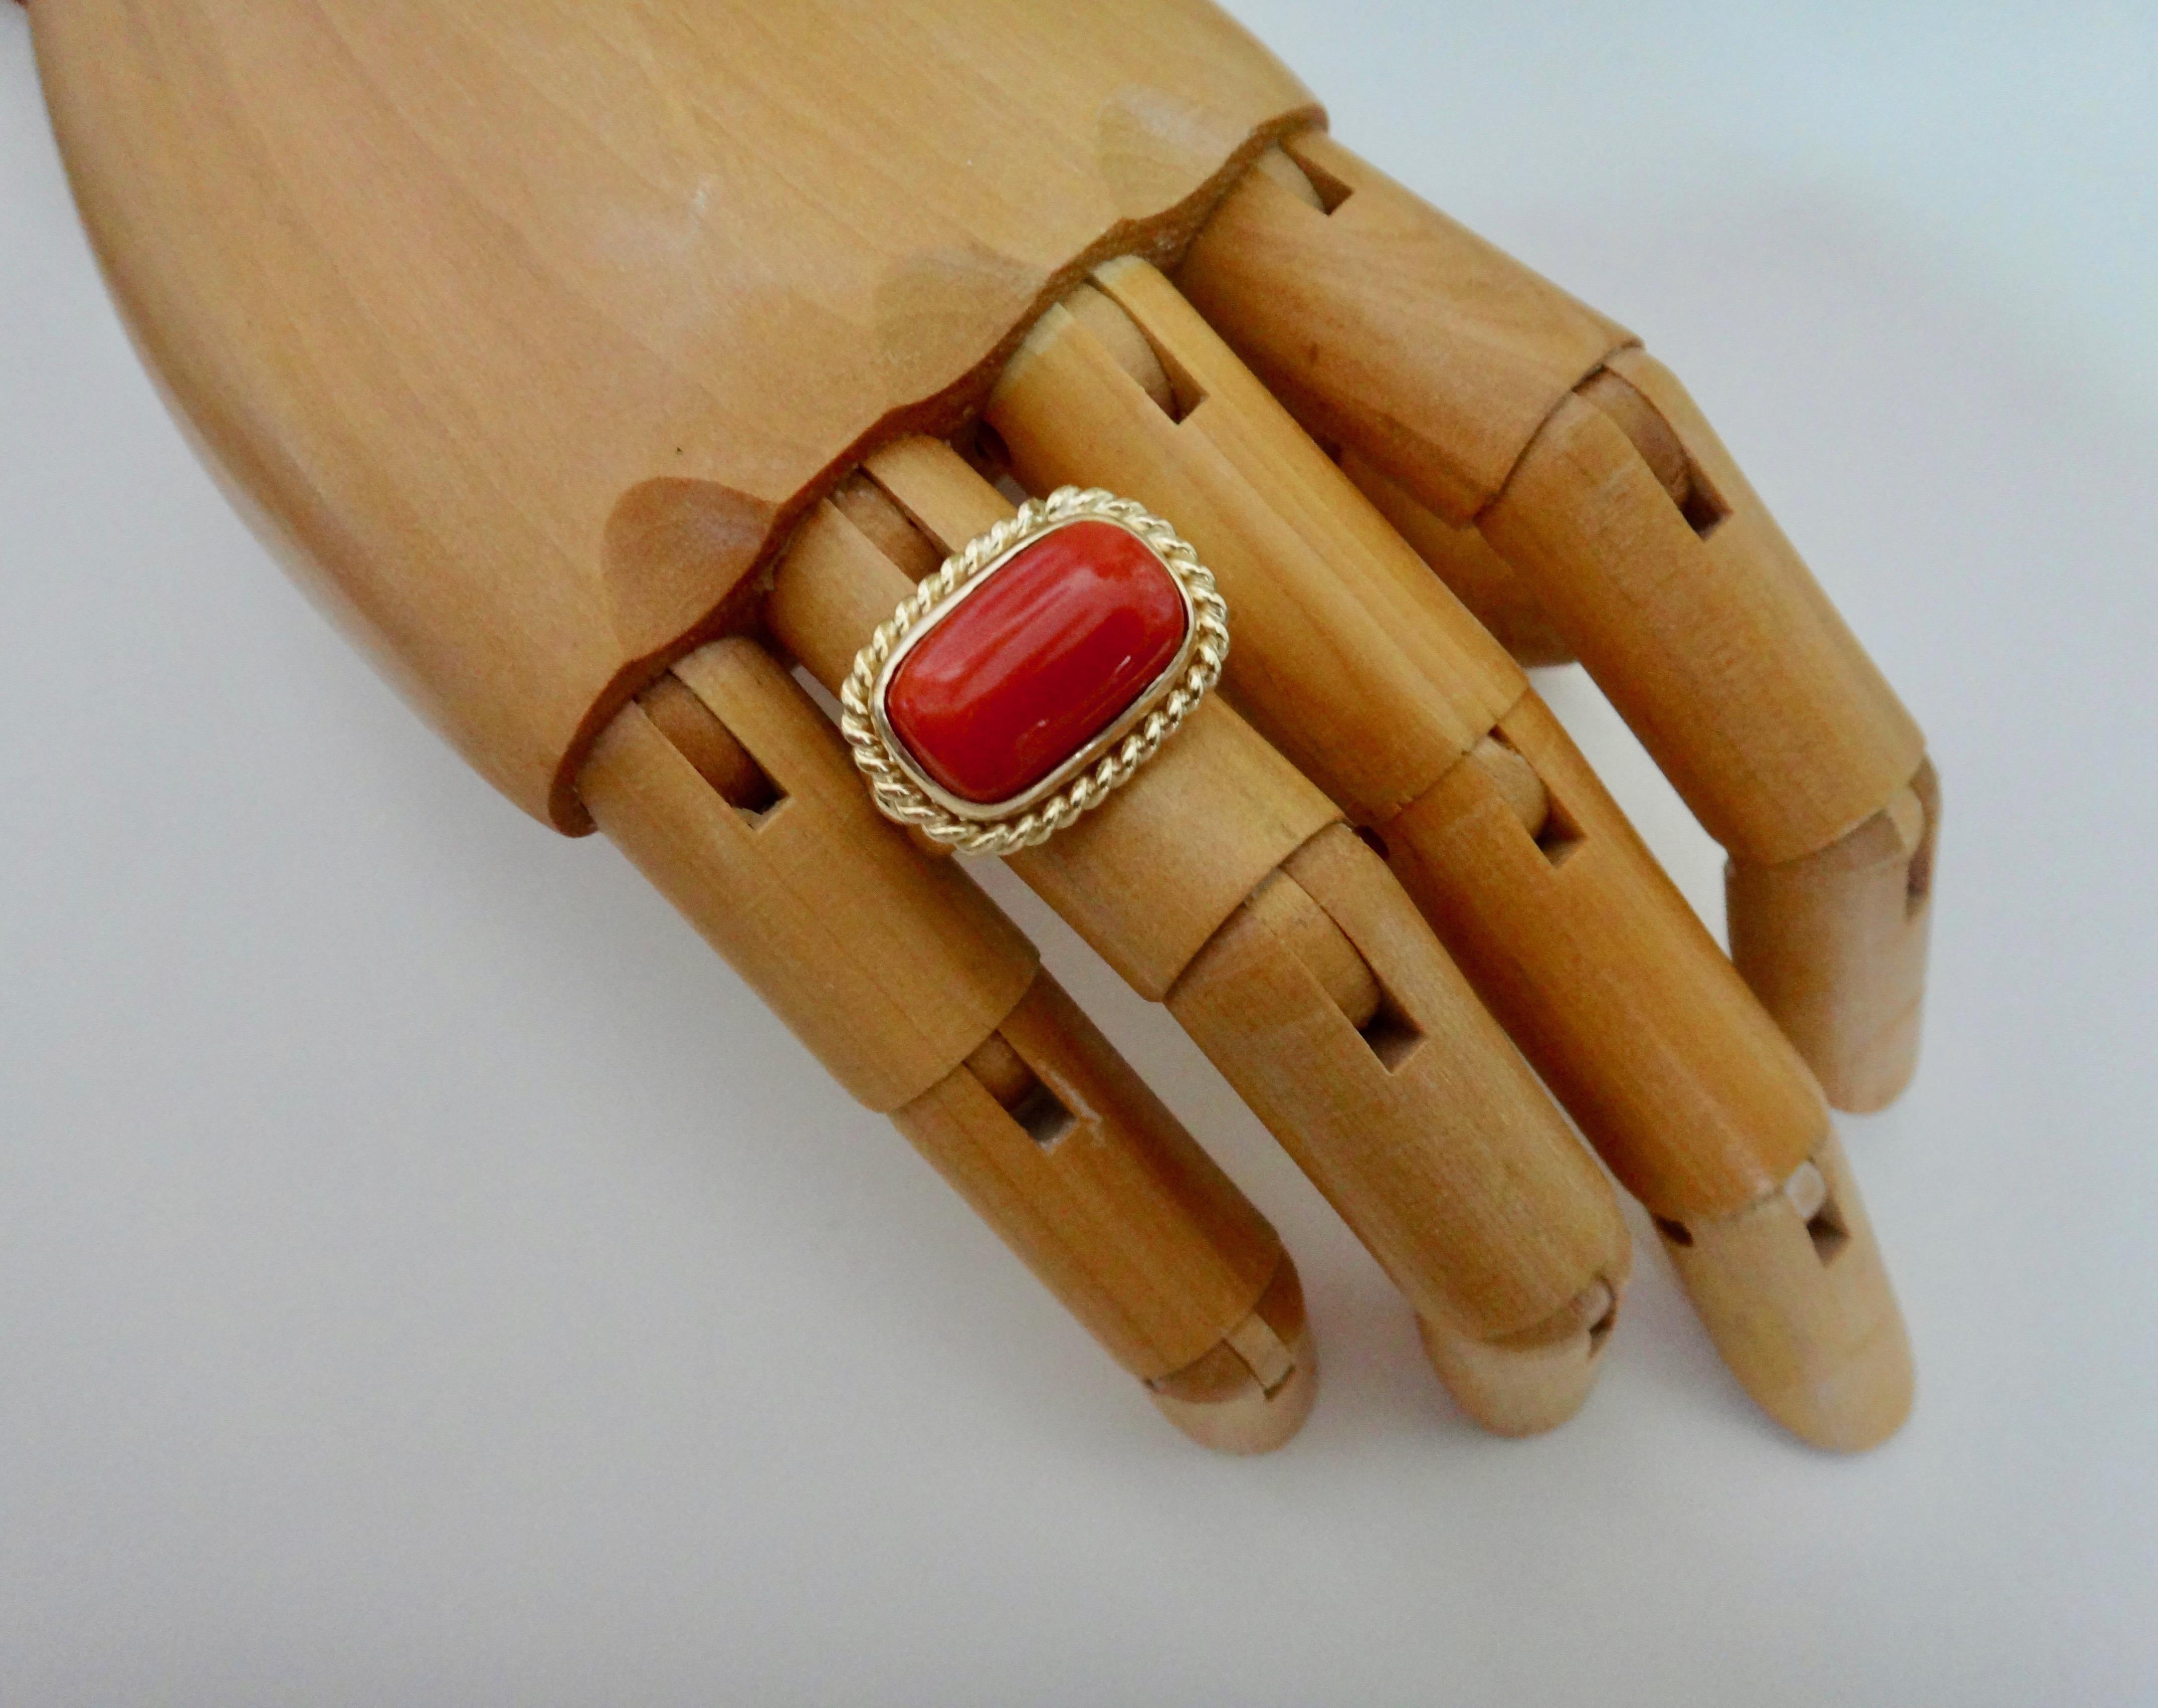 Mediterranean red coral is featured in this antique style 